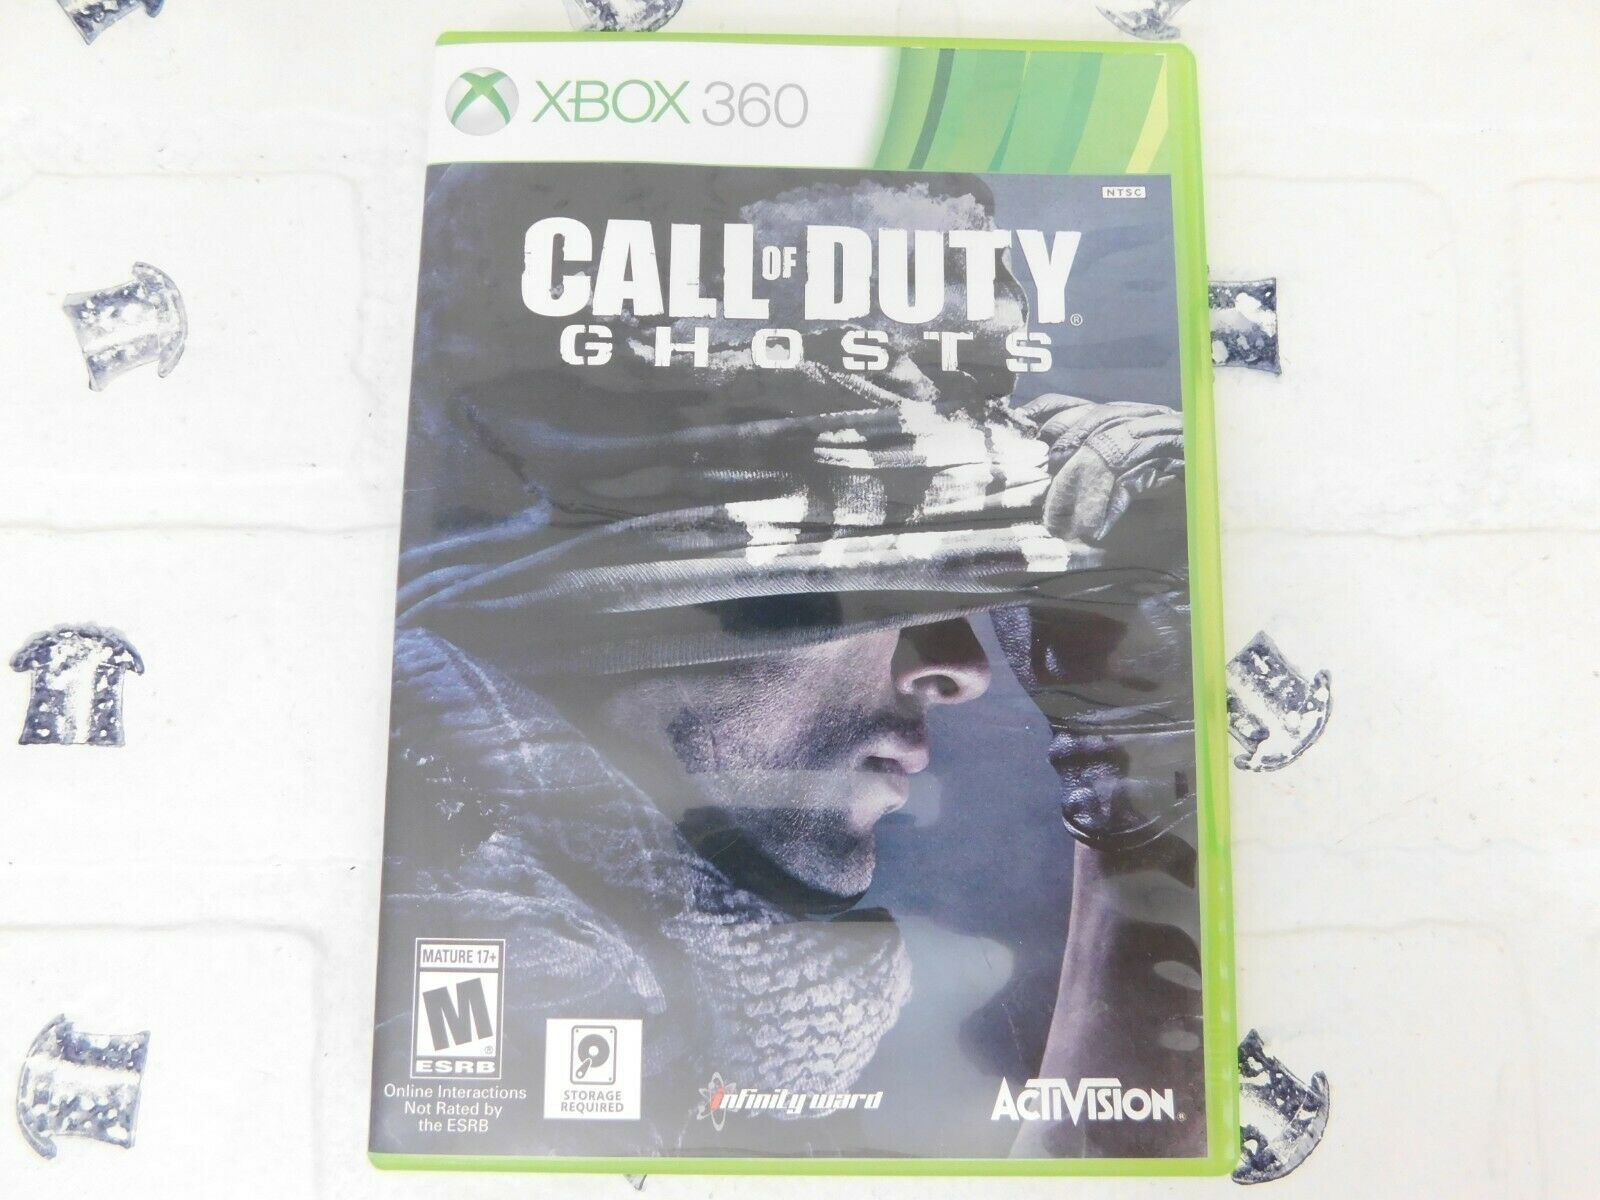 Primary image for Call of Duty: Ghosts for Xbox 360 XBOX 360 Video Game